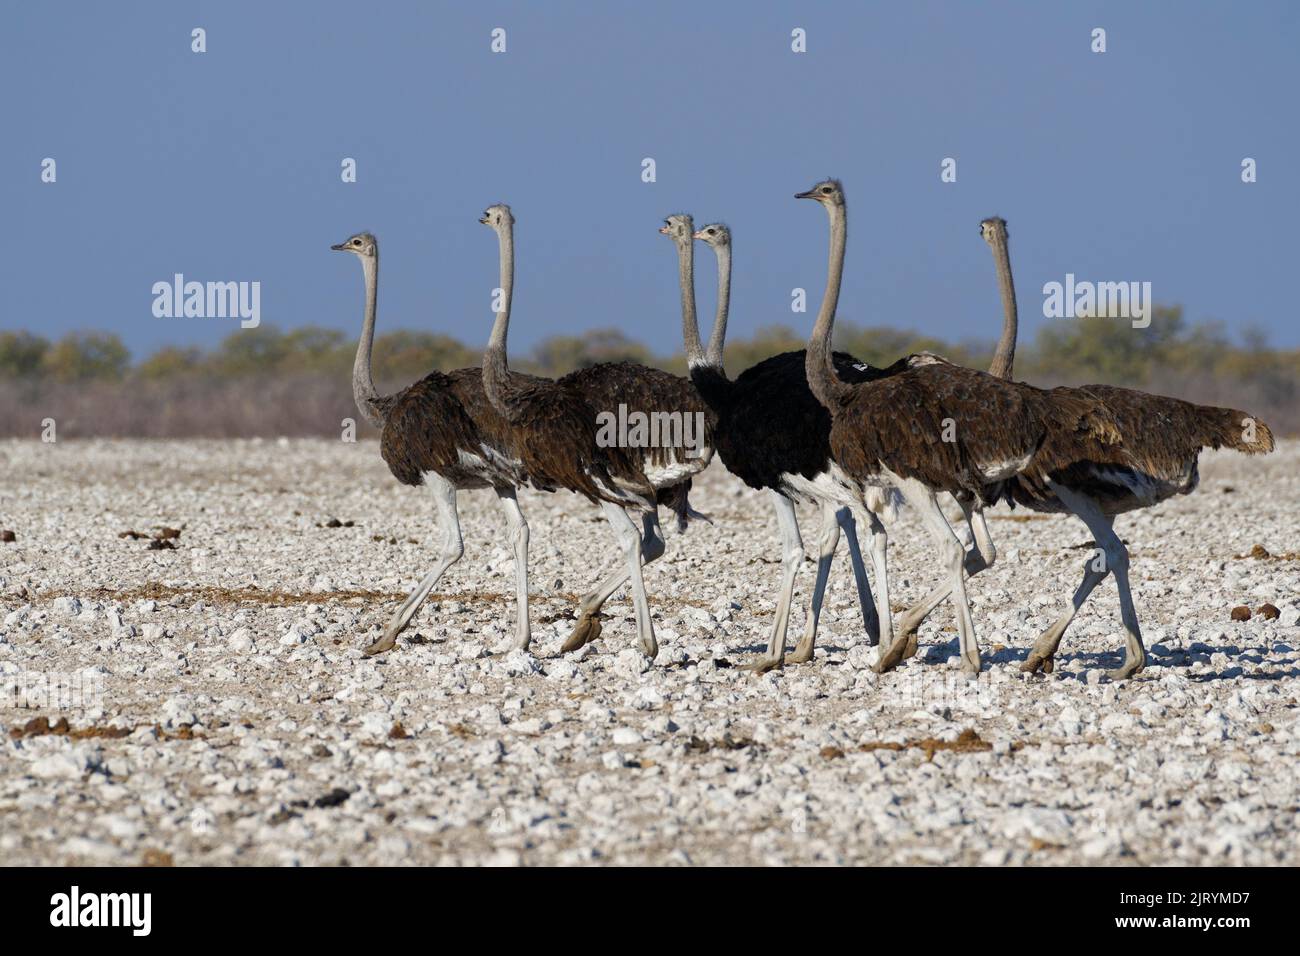 South African ostriches (Struthio camelus australis), herd walking, male and female adult ostriches leaving waterhole, Etosha National Park, Namibia, Stock Photo